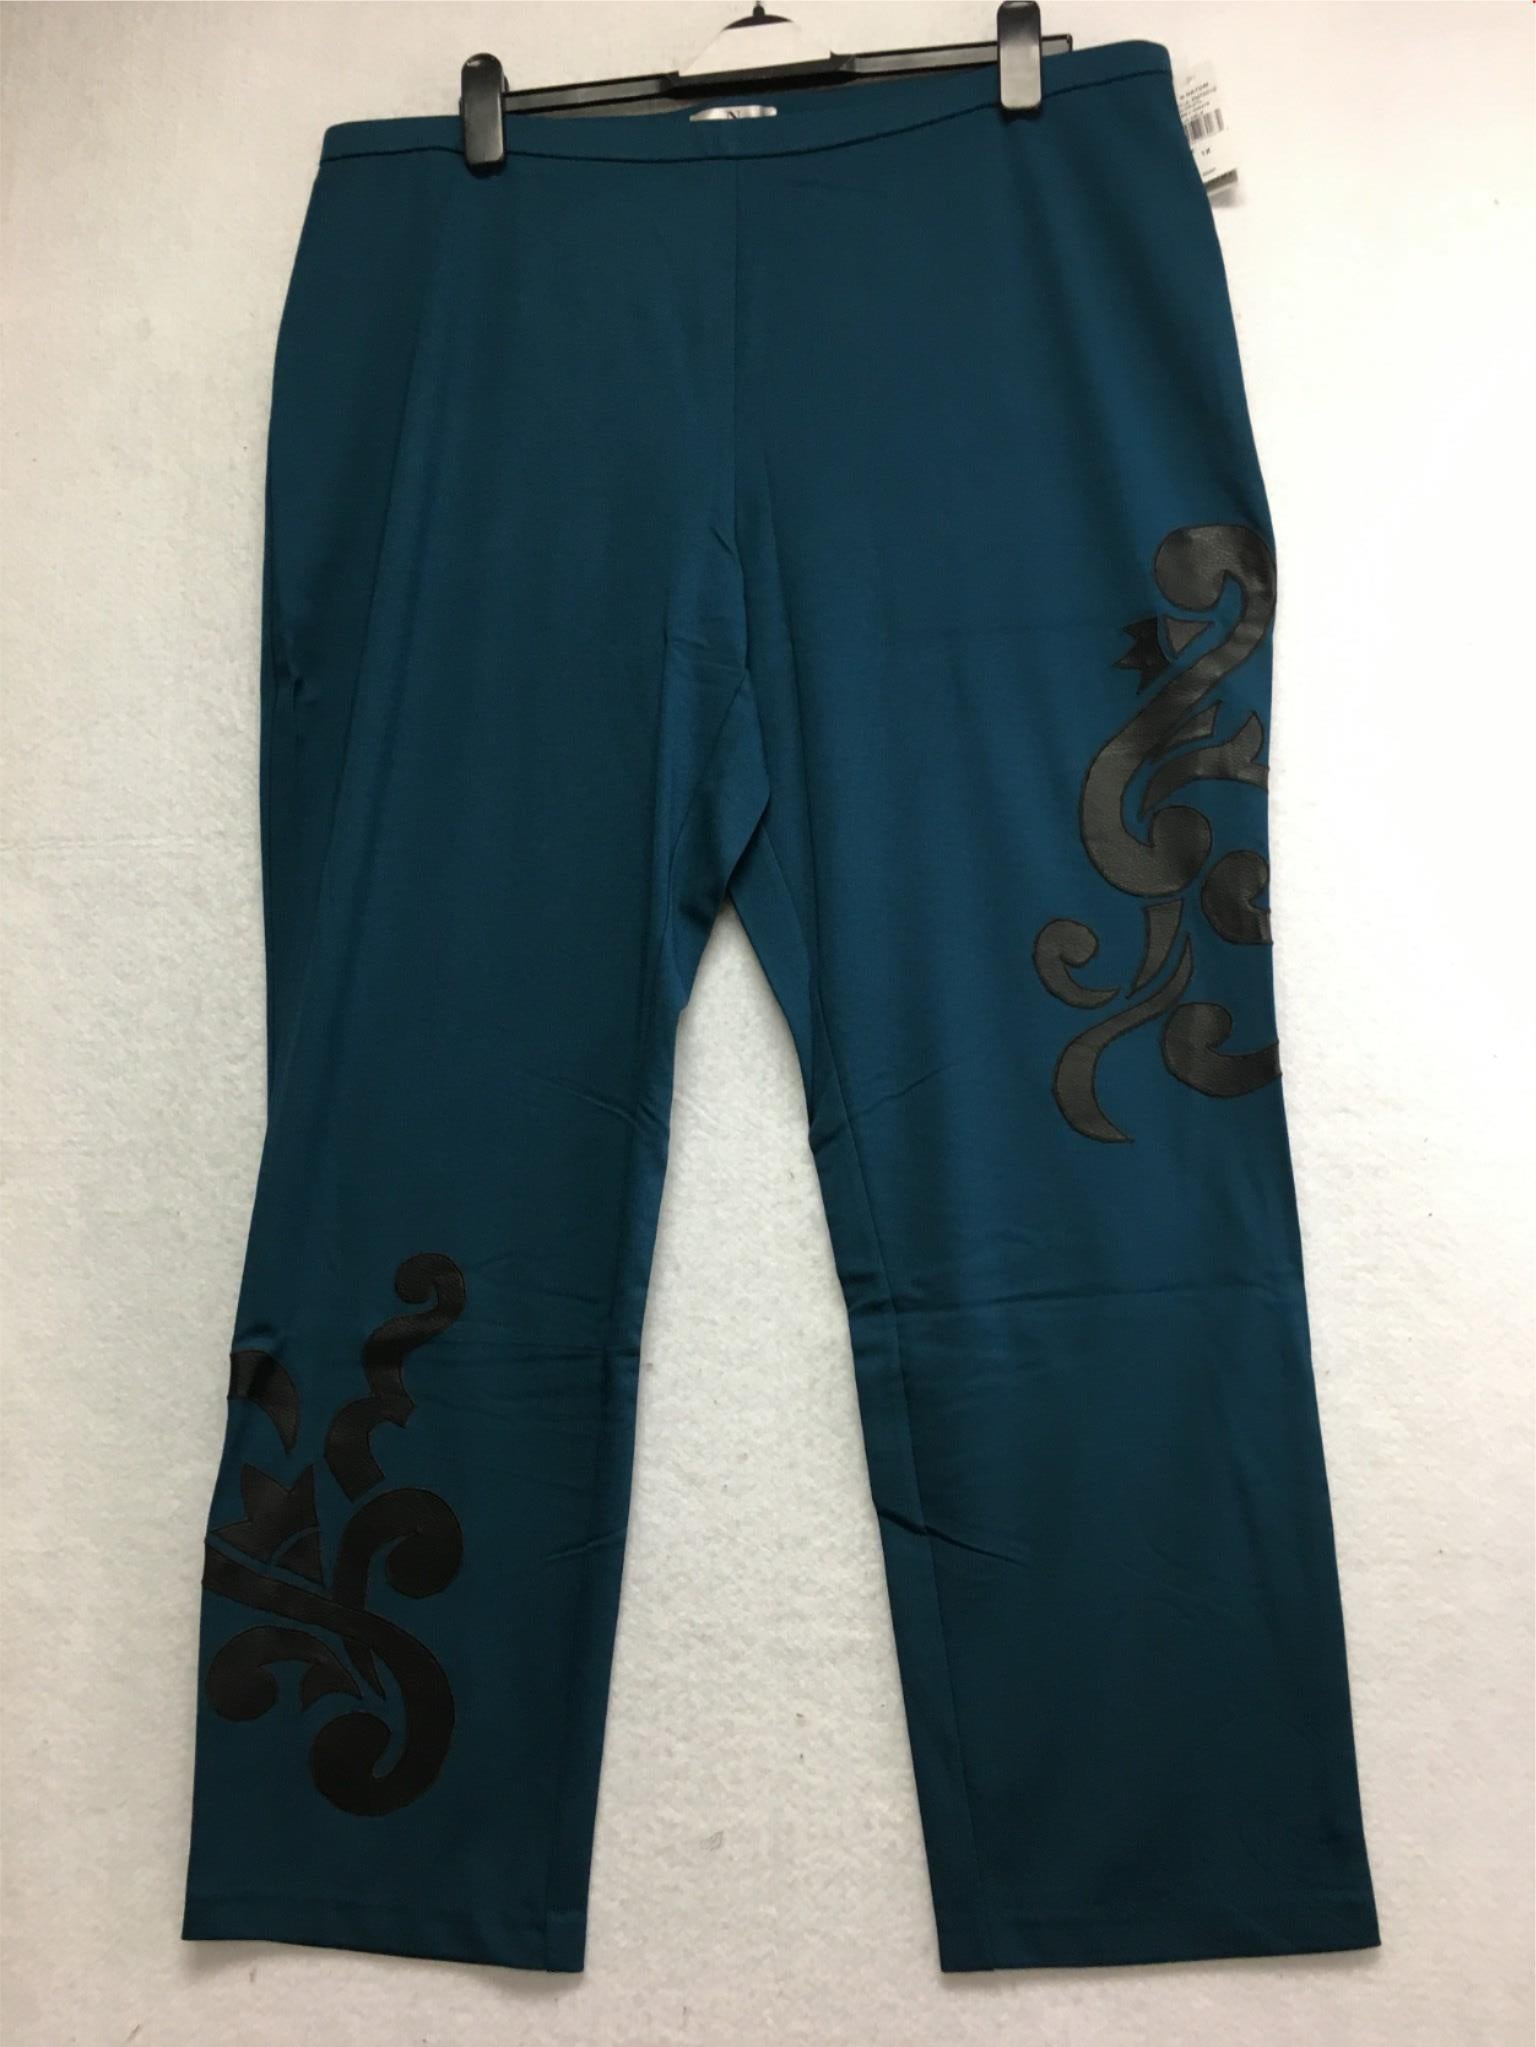 New N NATORI, Solid Double Knit Pant With Applique Dark Teal 1X